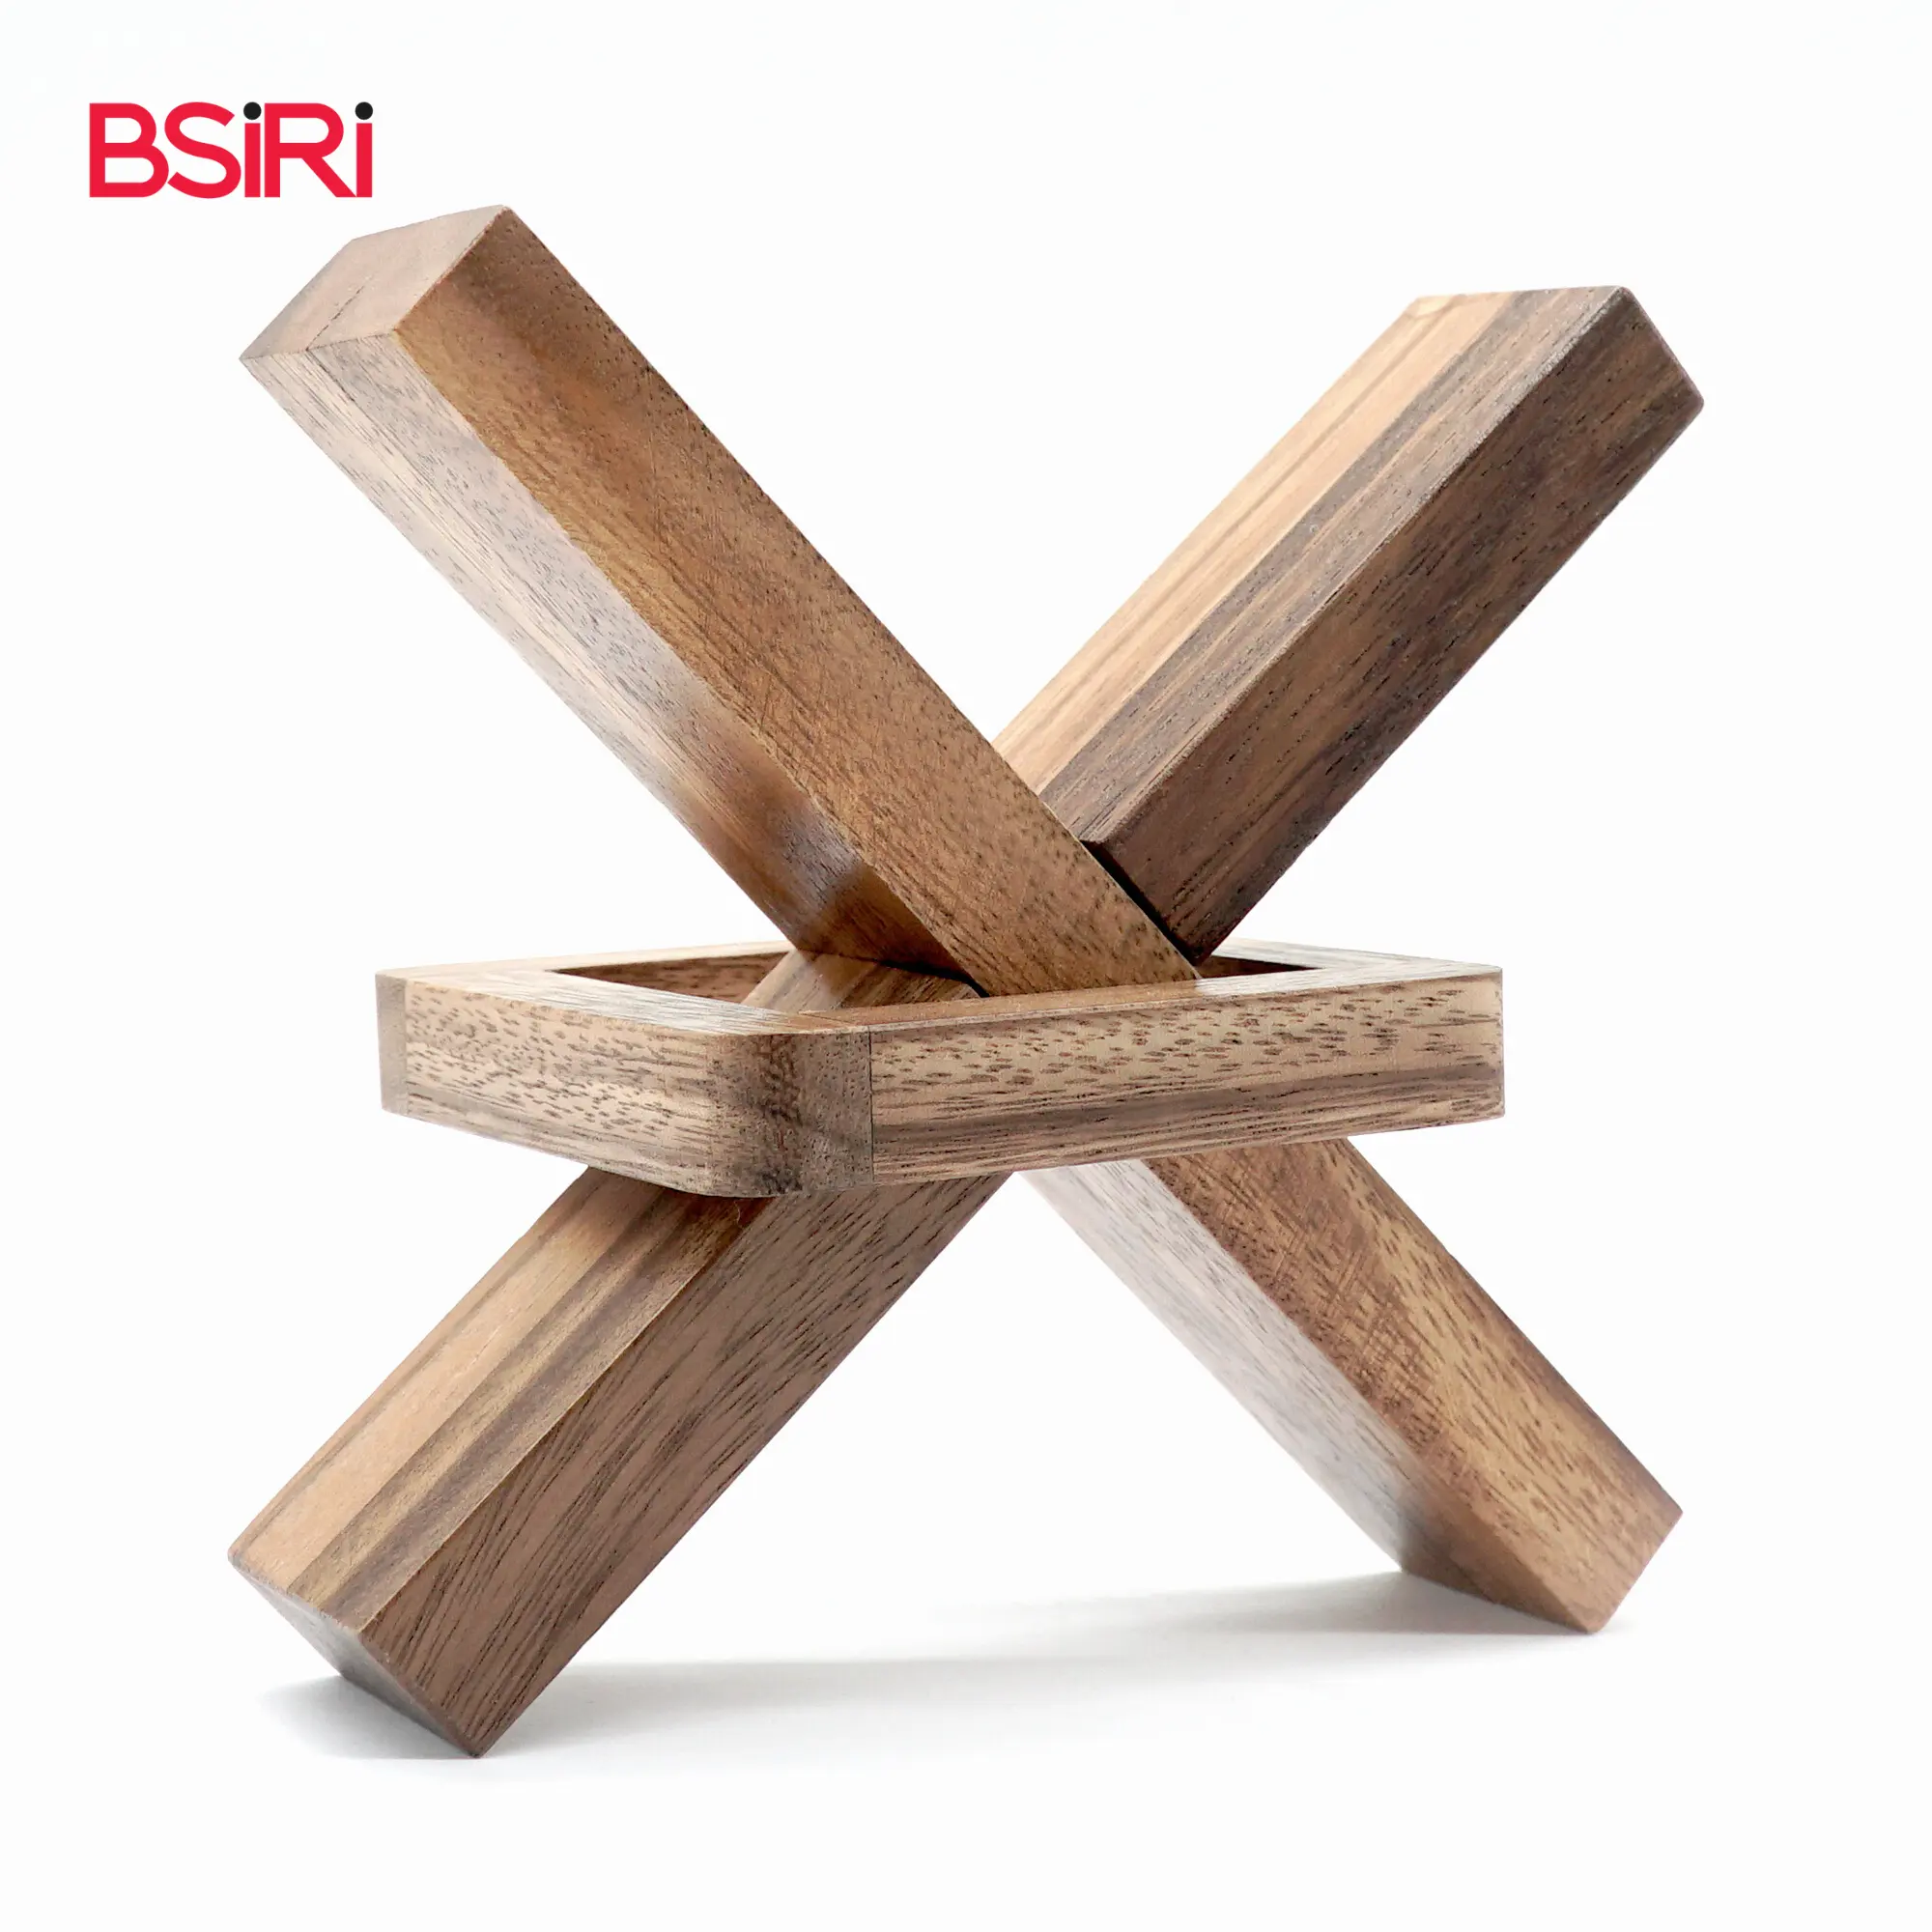 Square in X Cross Out L OEM Best Seller Wooden toys High Quality Product Thailand Best seller Unique Gifts and toy for kids